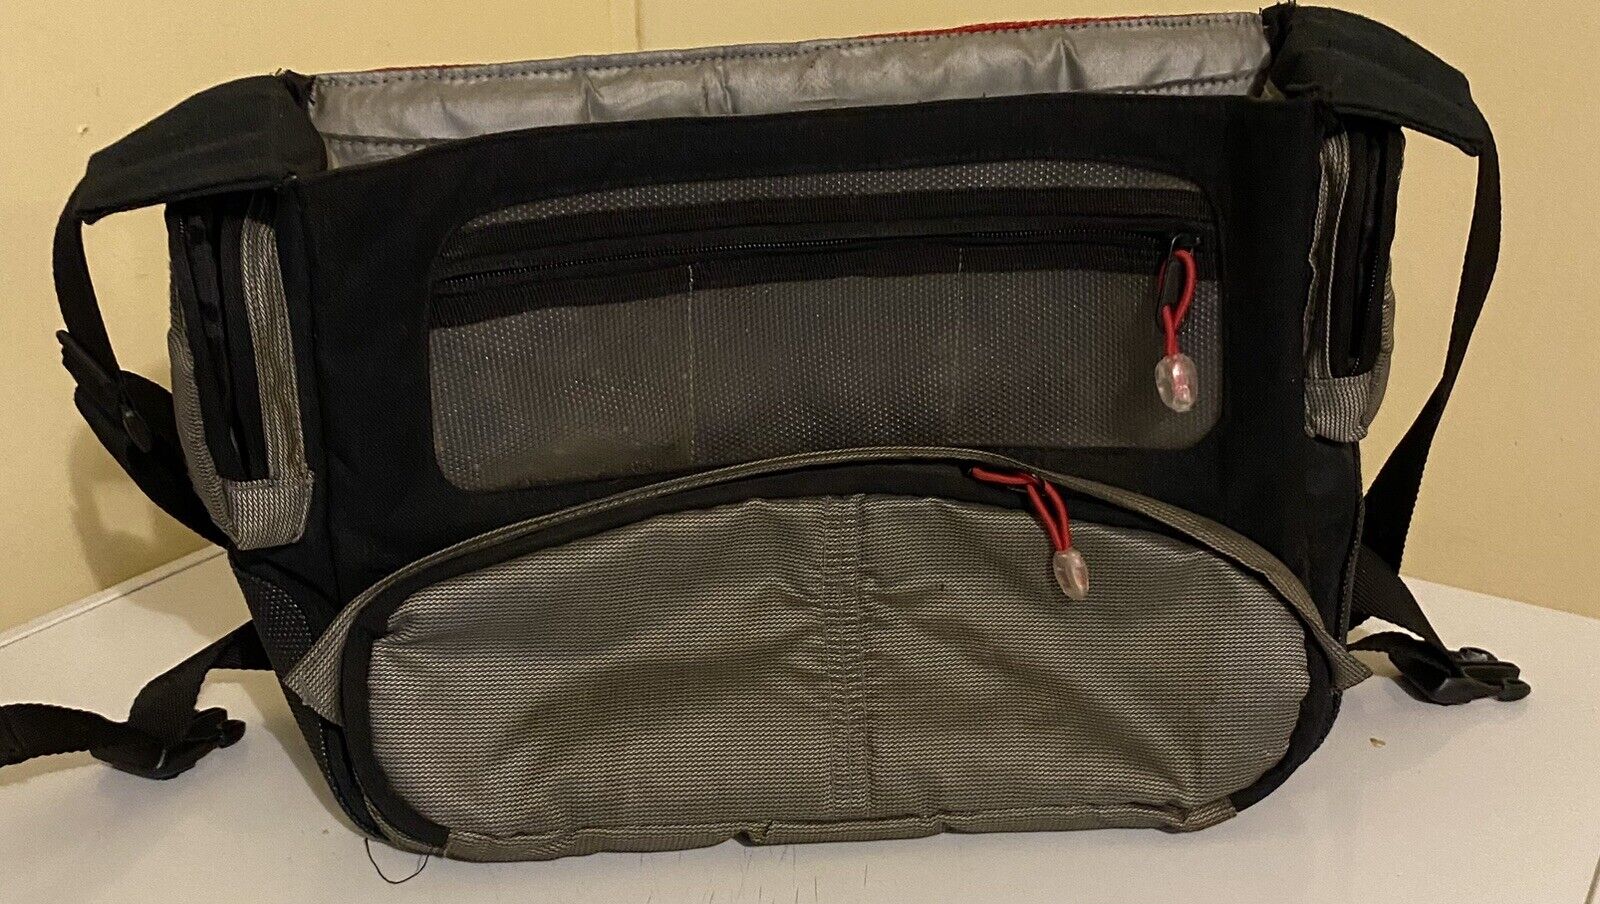 XMODS RC Car Bag for Drones & Gaming